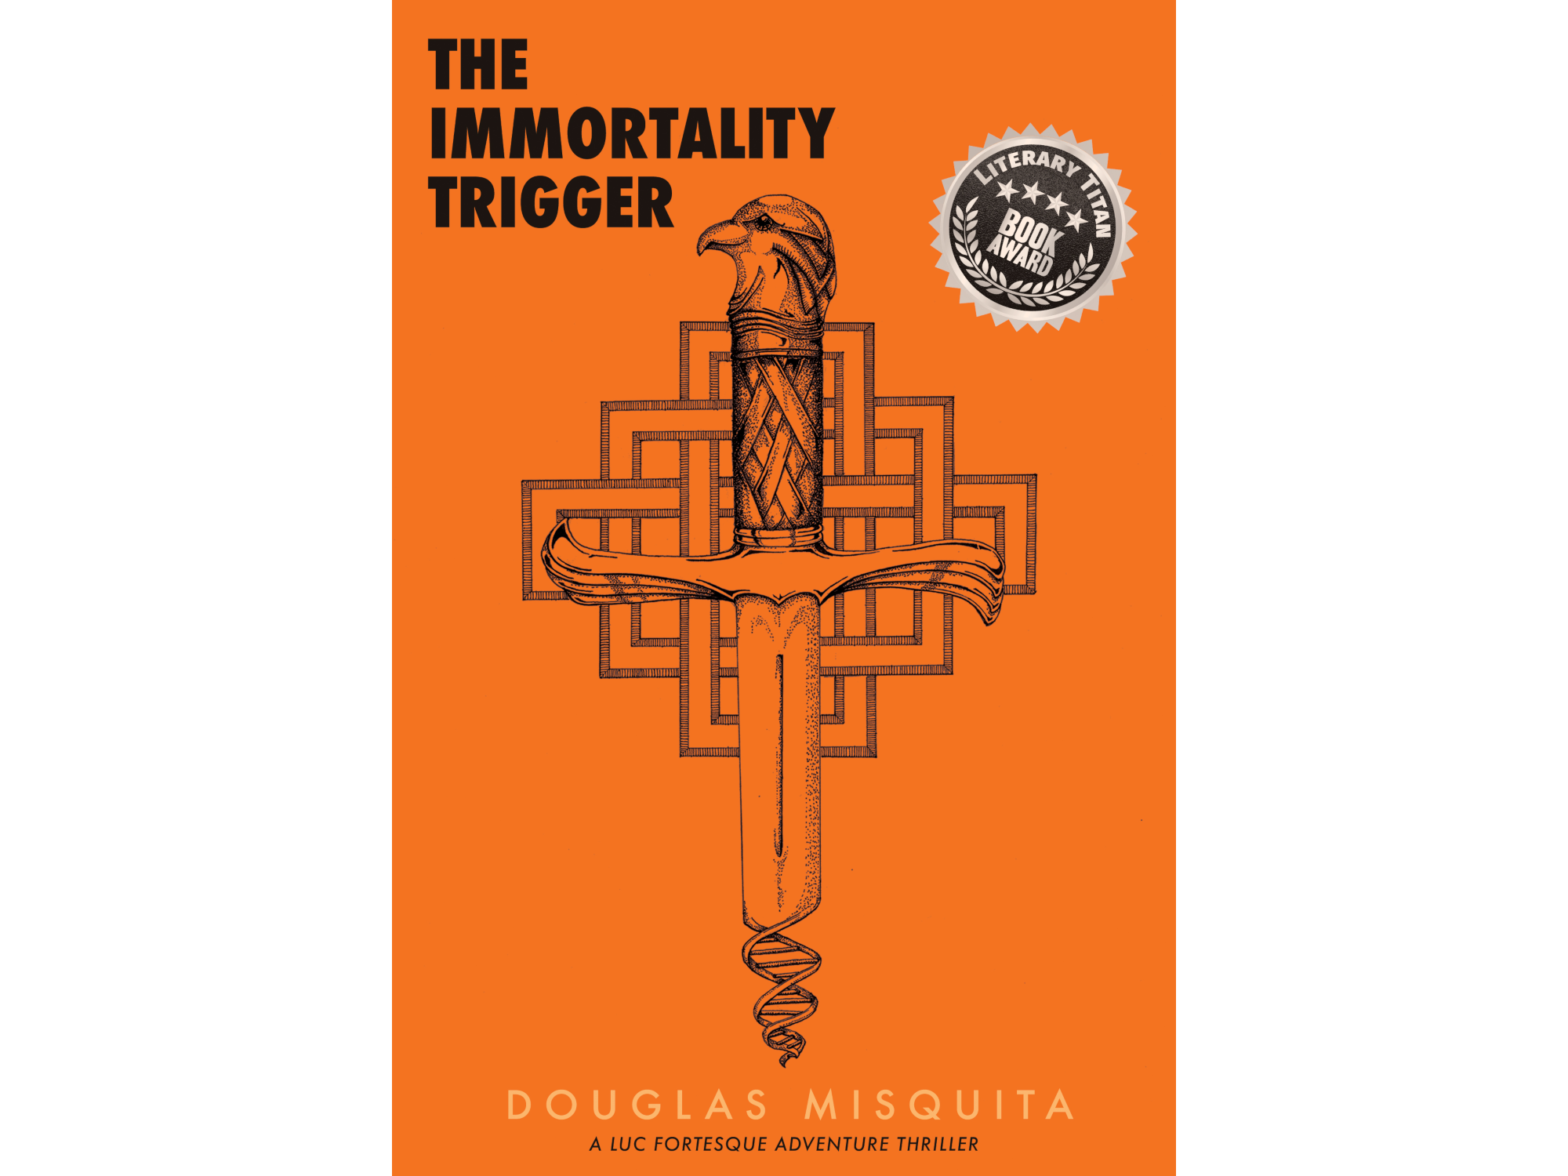 The Immortality Trigger